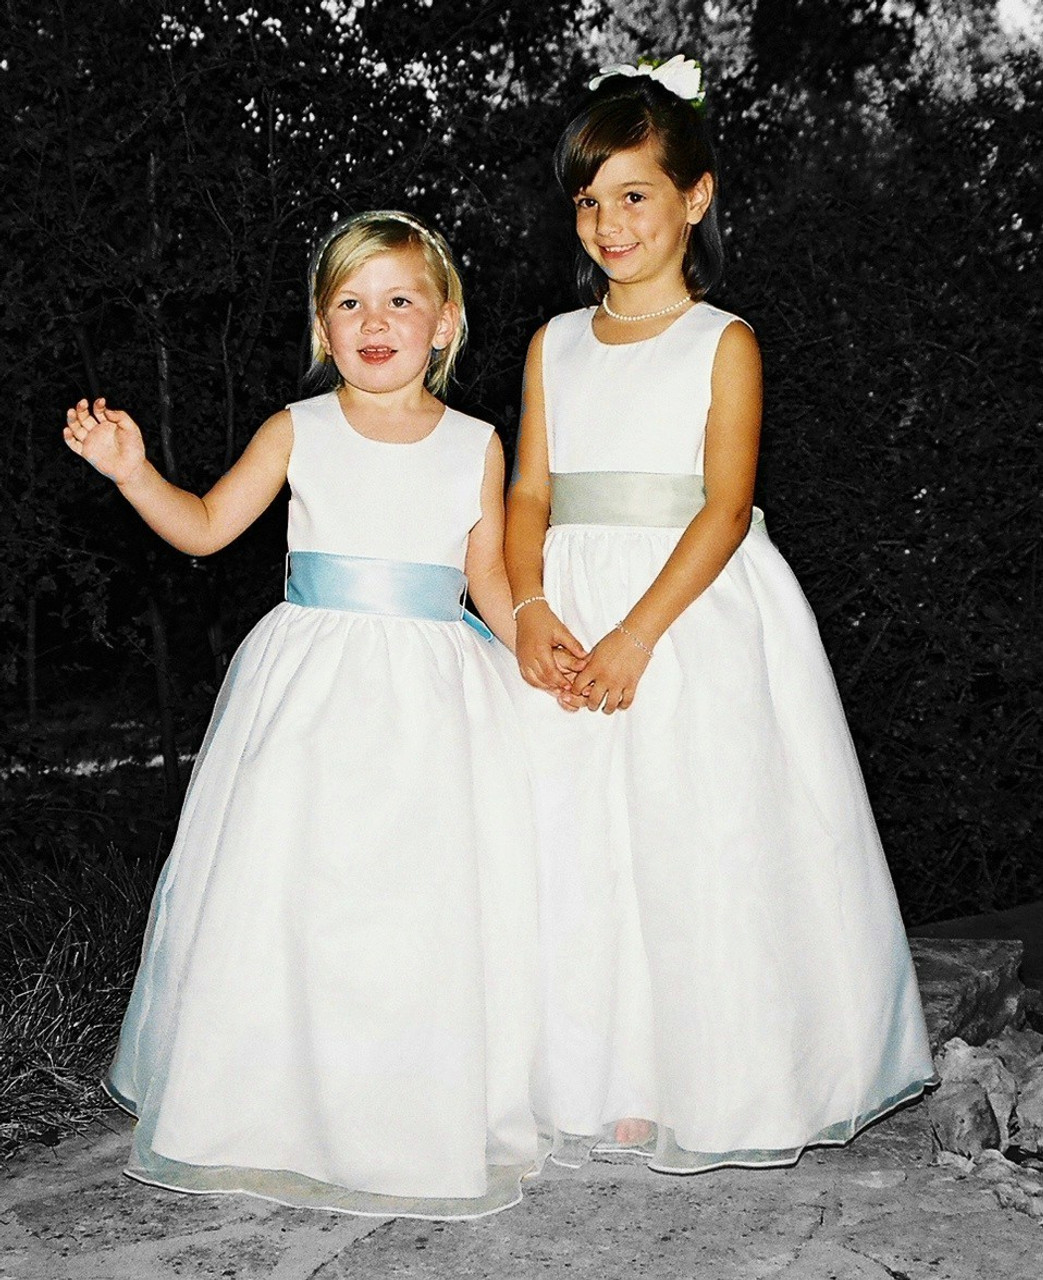 Rosebud Fashions Flower Girl Dresses  Style 5101 -Satin and Organza